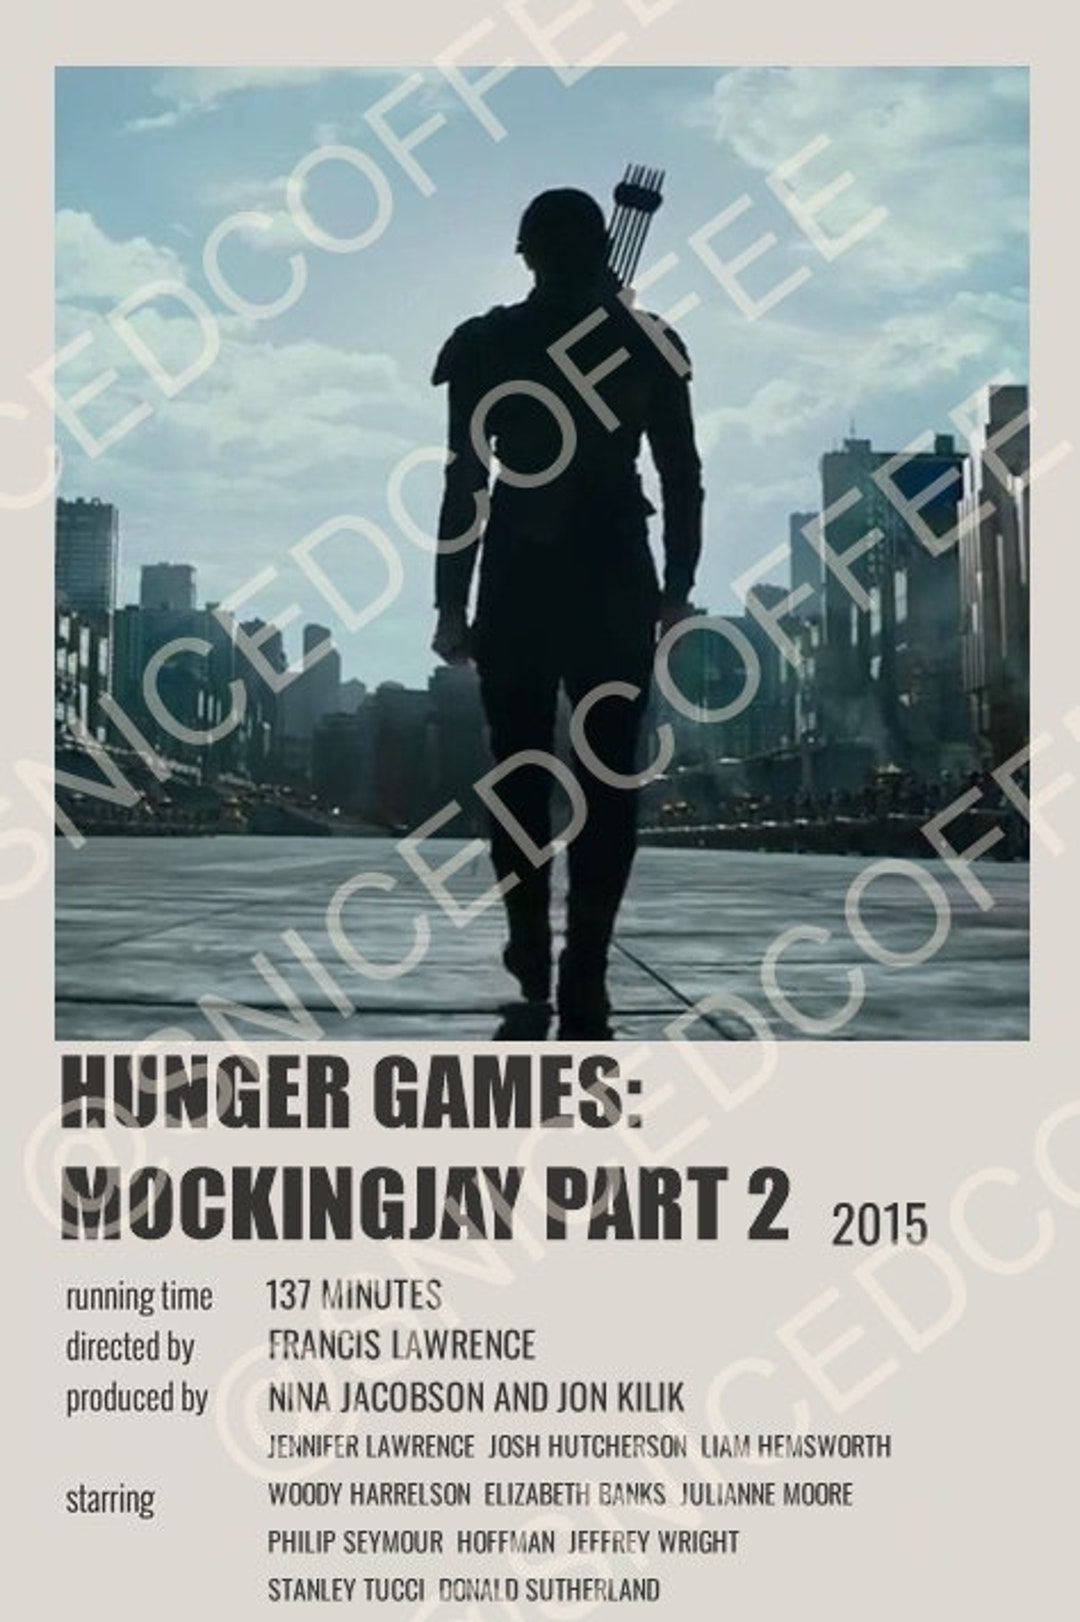 The Hunger Games: Mockingjay — Part 2' Sets China Release Date